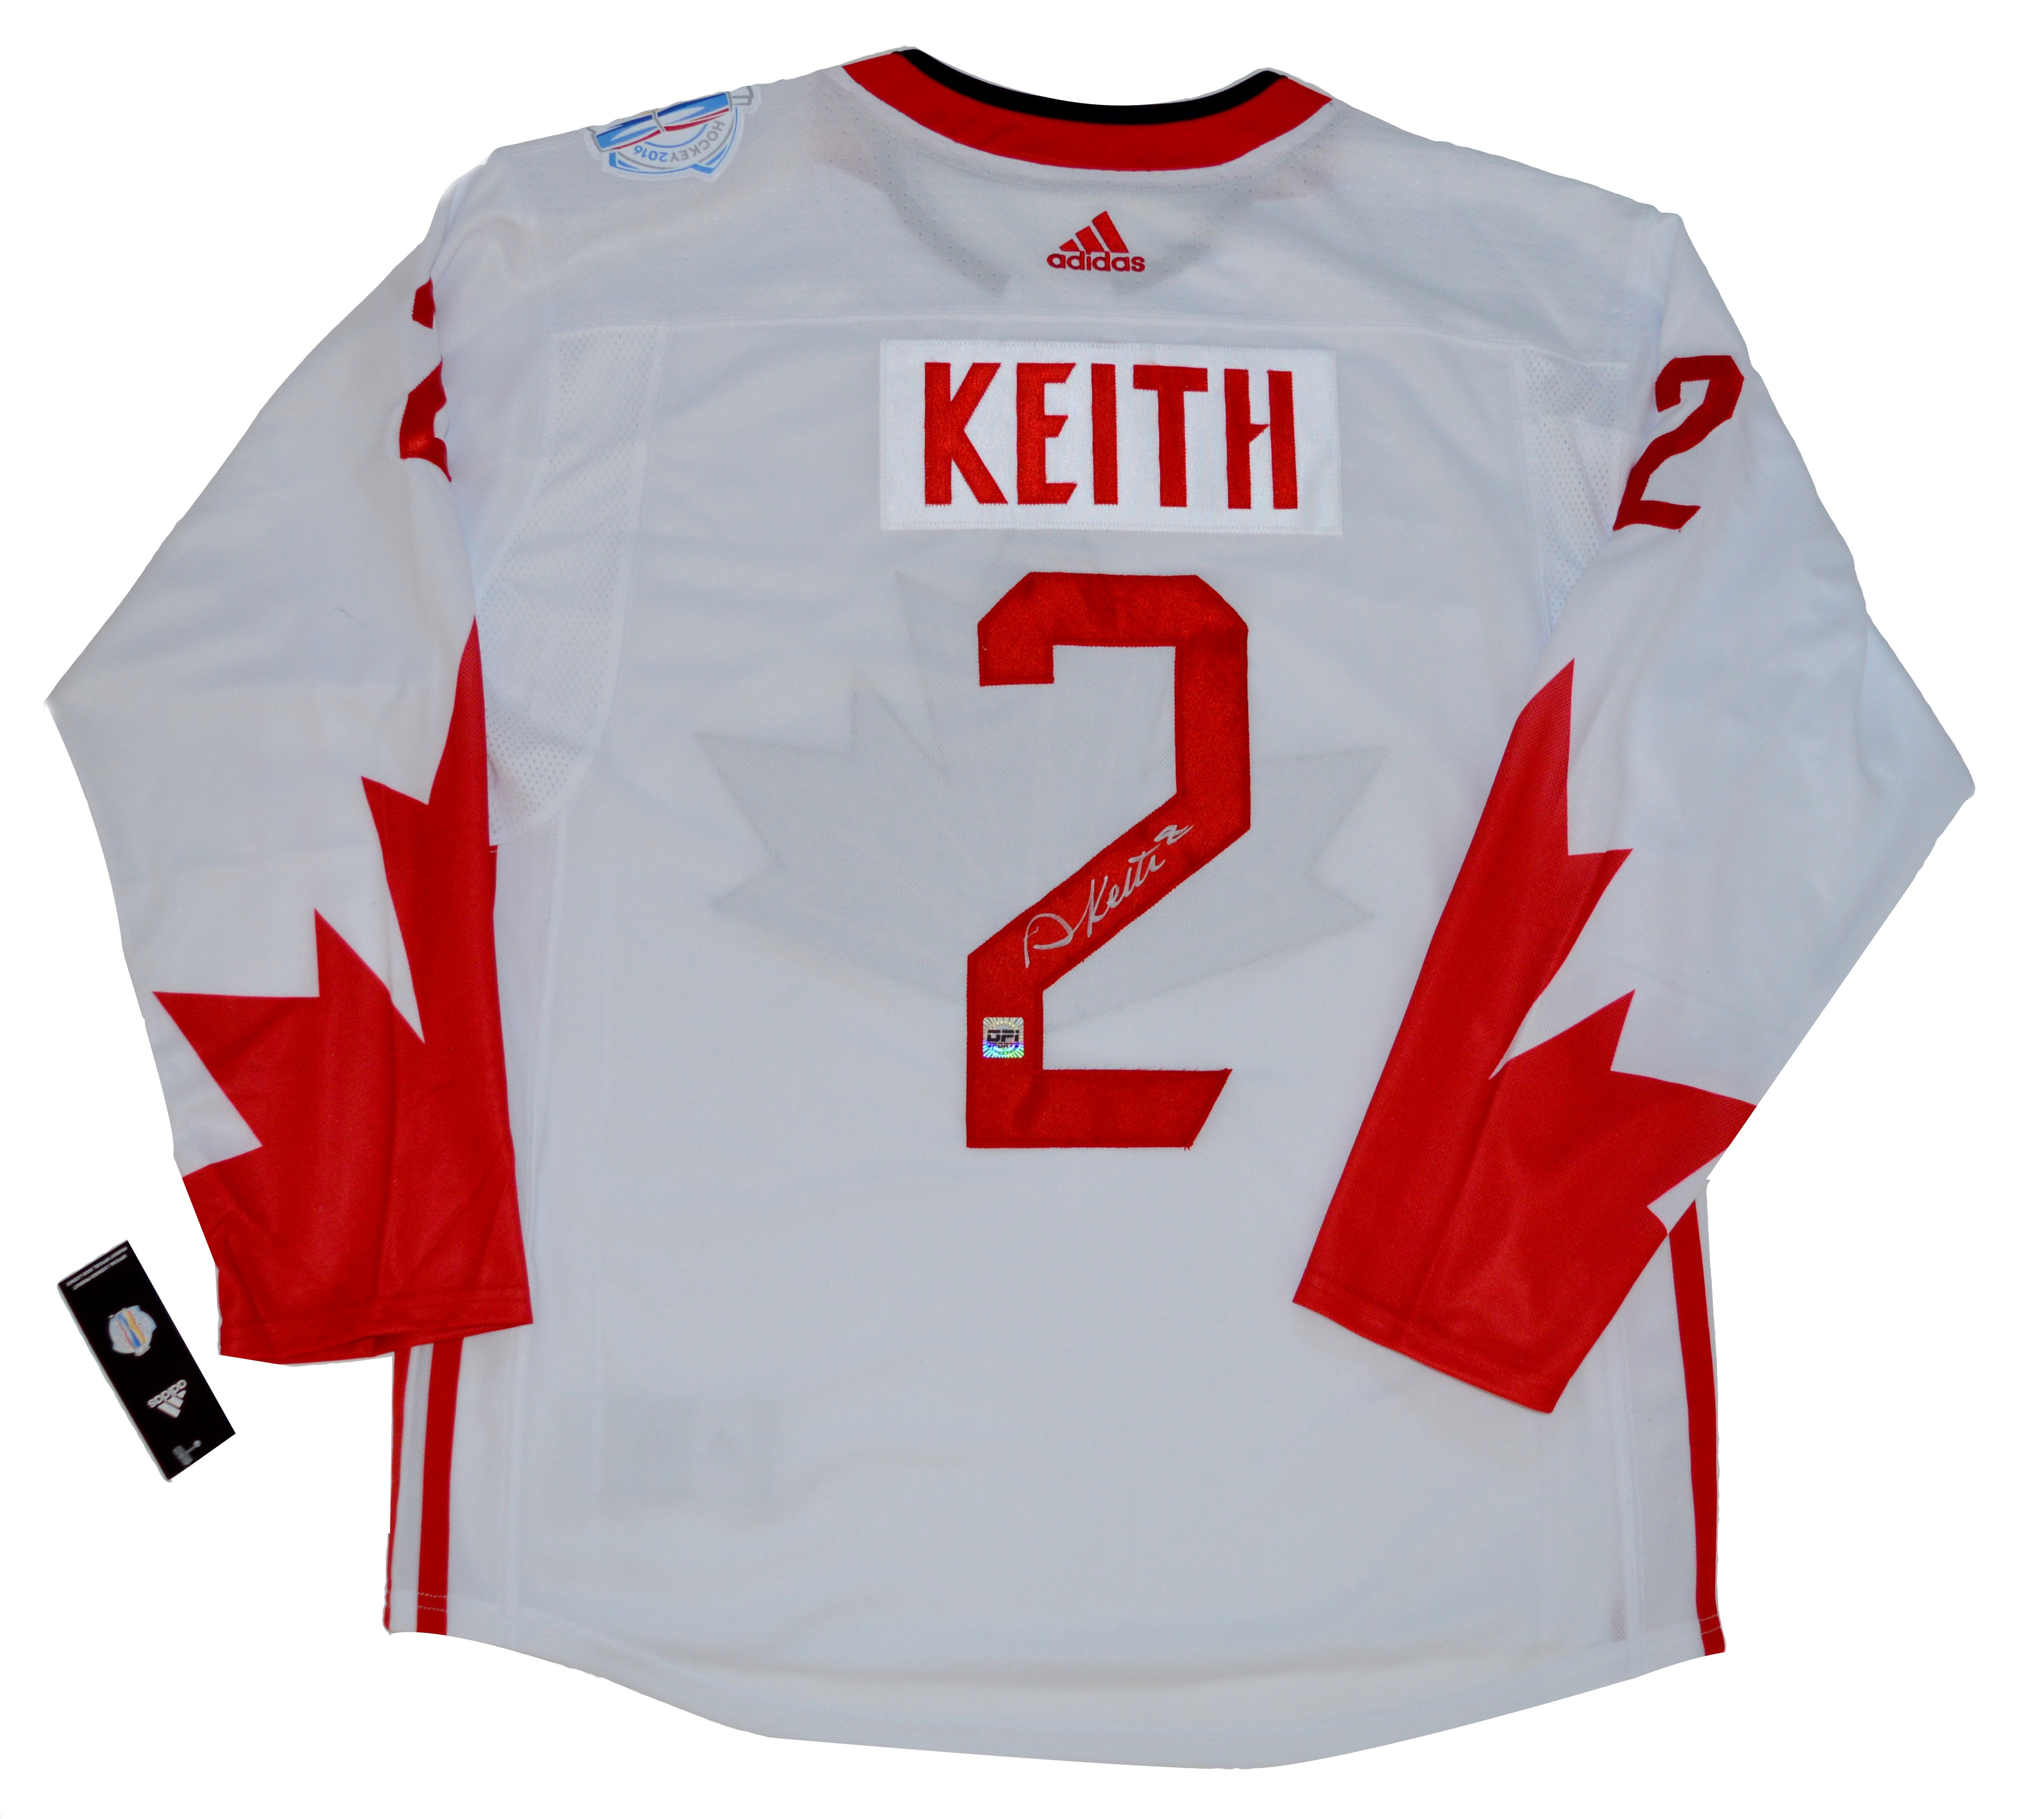 duncan keith autographed jersey